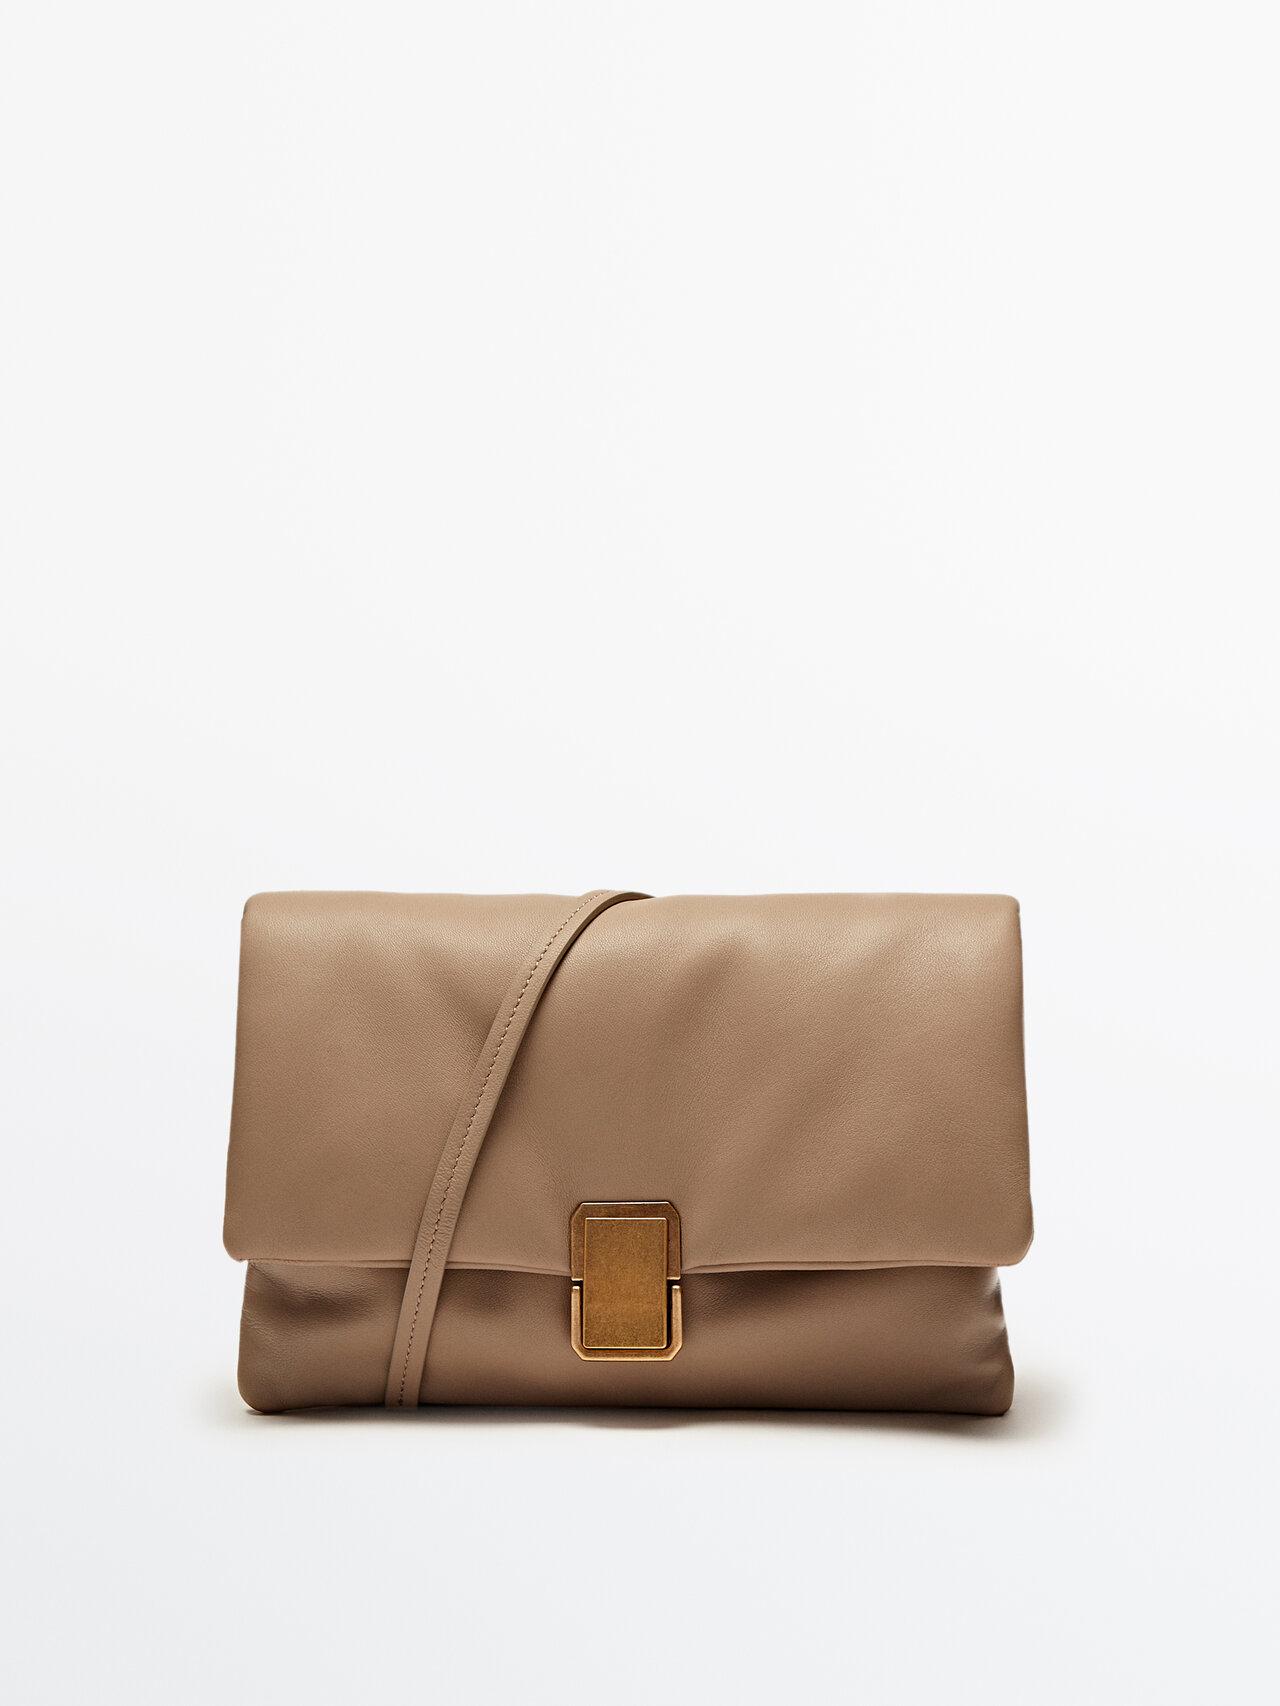 MASSIMO DUTTI Nappa Leather Quilted Bag in Natural | Lyst